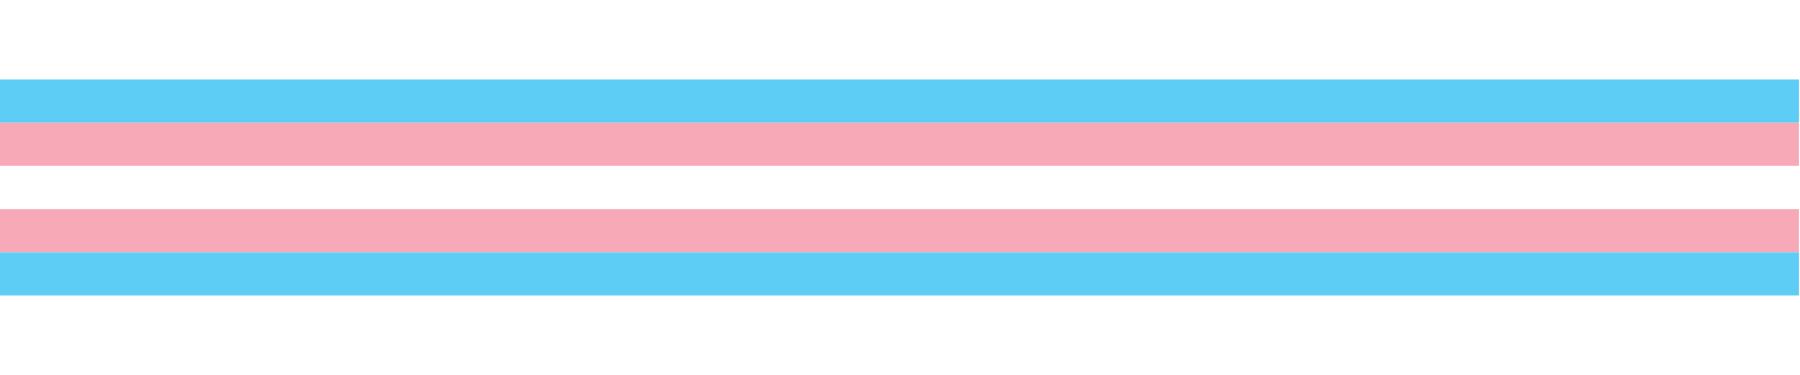 A decorative website striped banner design in trans colors from top to bottom: Light Blue, Pink, White, Pink, and Light Blue. 